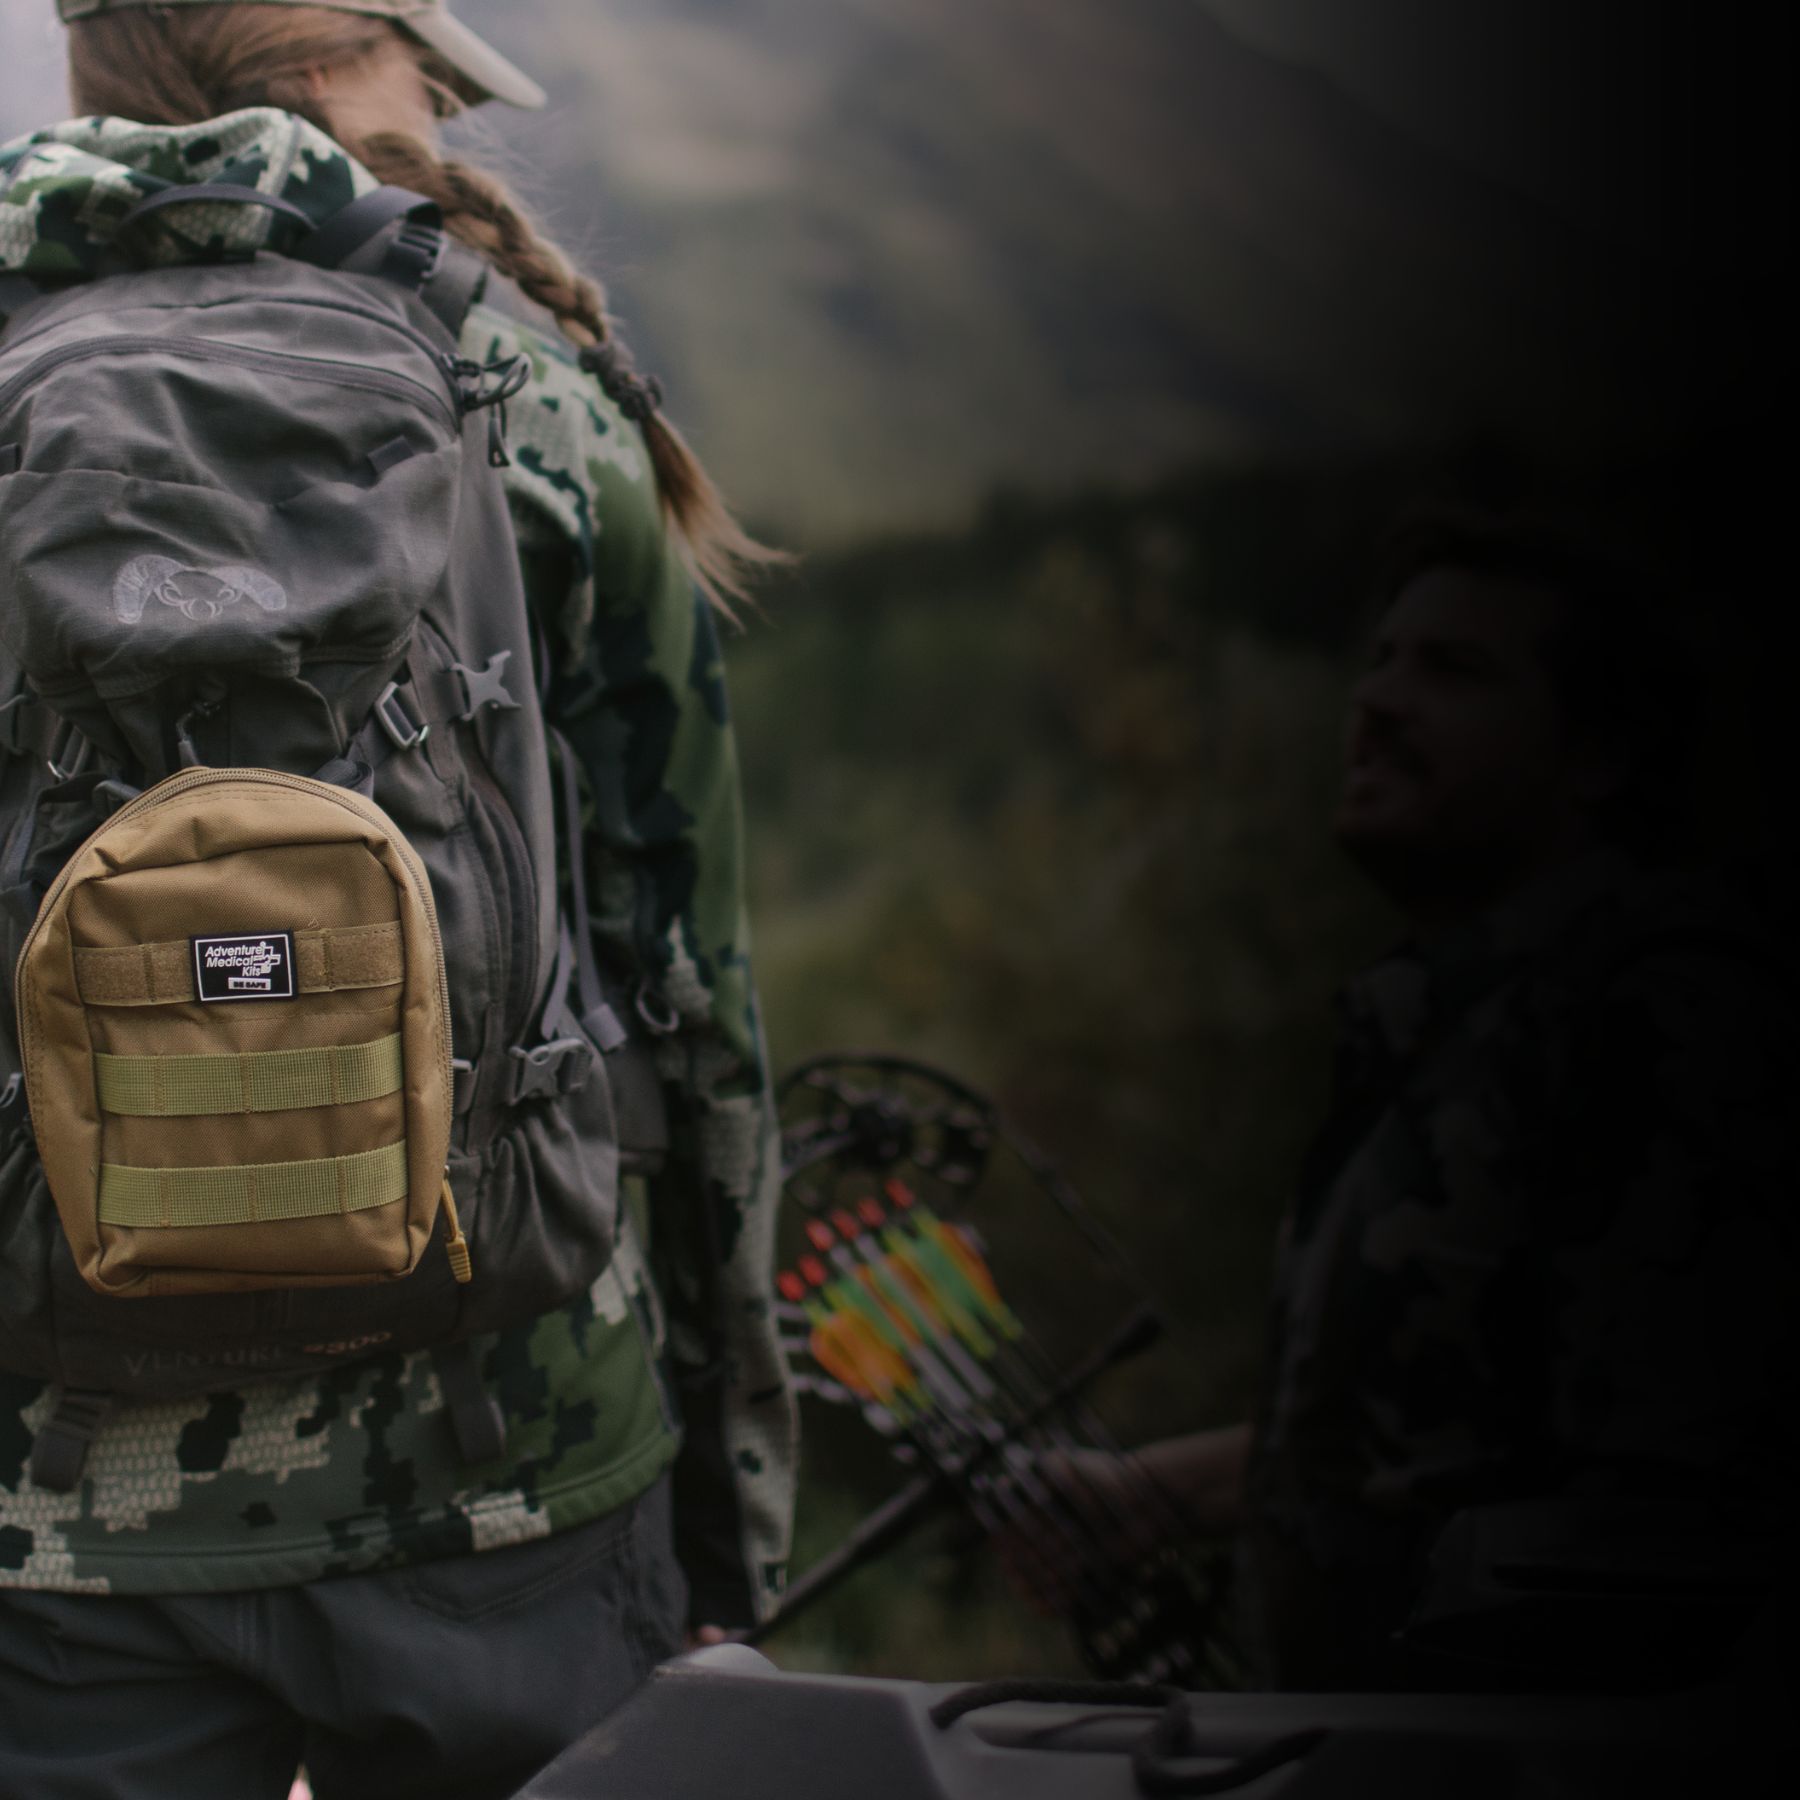 Woman in camo with MOLLE kit on backpack